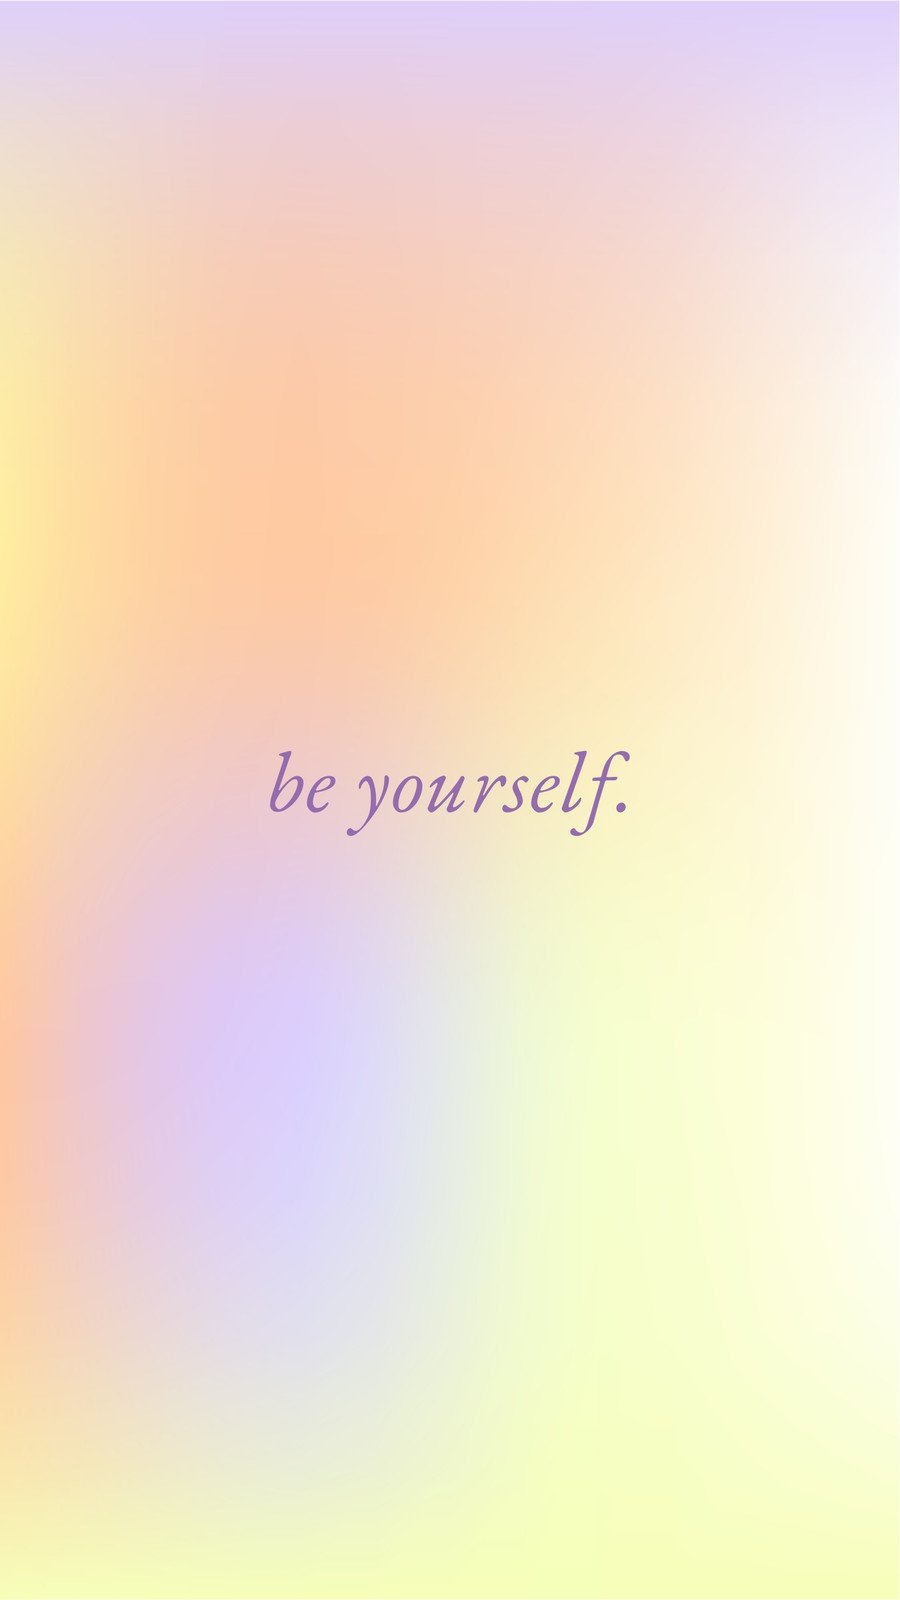 Be Yourself quotes  quotes wallpers  Wallpaper quotes Wallpaper  iphone quotes Phone wallpaper quotes